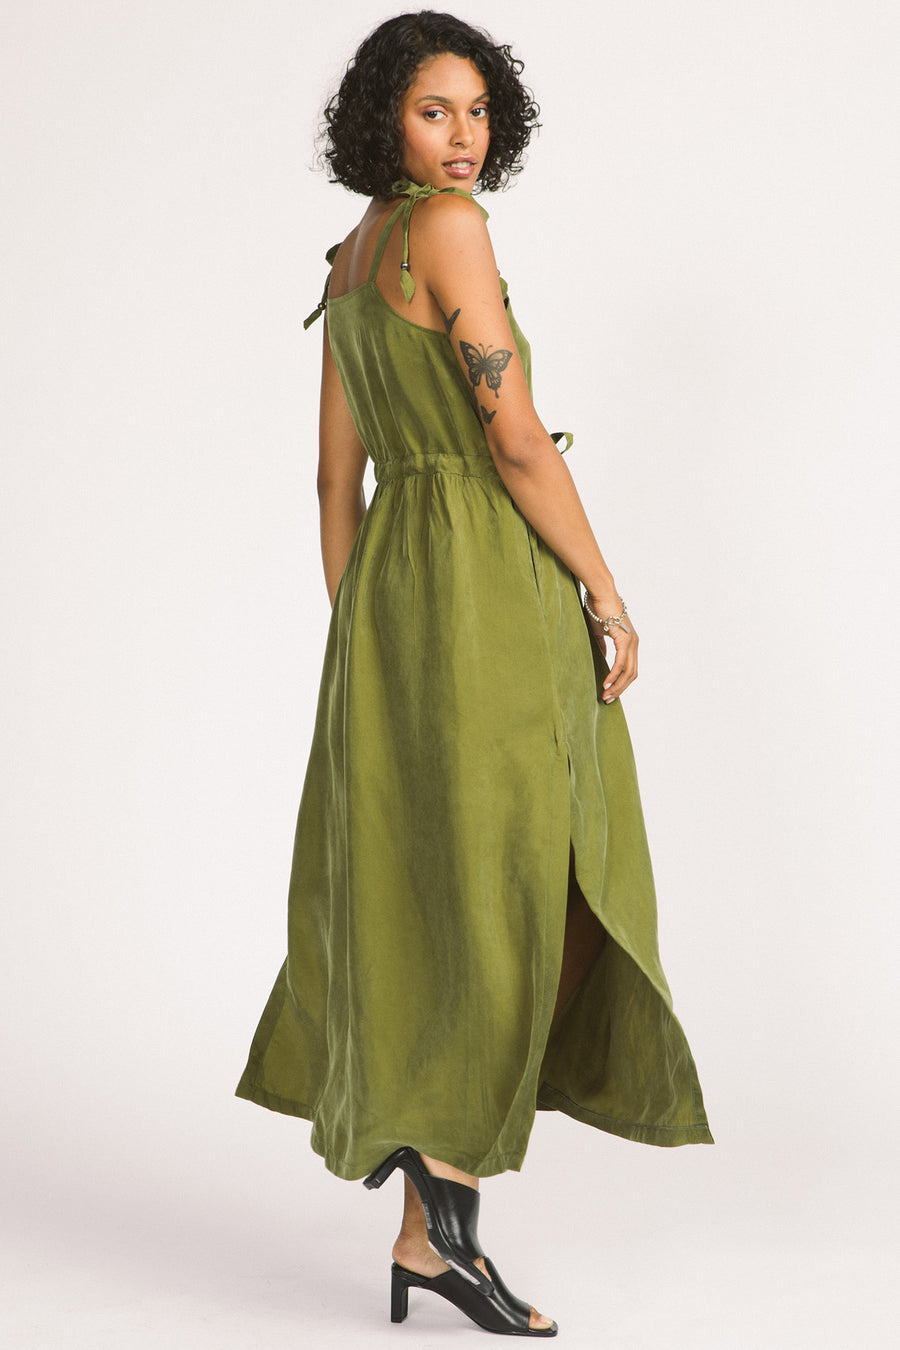 Back view of woman wearing moss green Novalie dress by Allison Wonderland with adjustable shoulder straps and waist. 